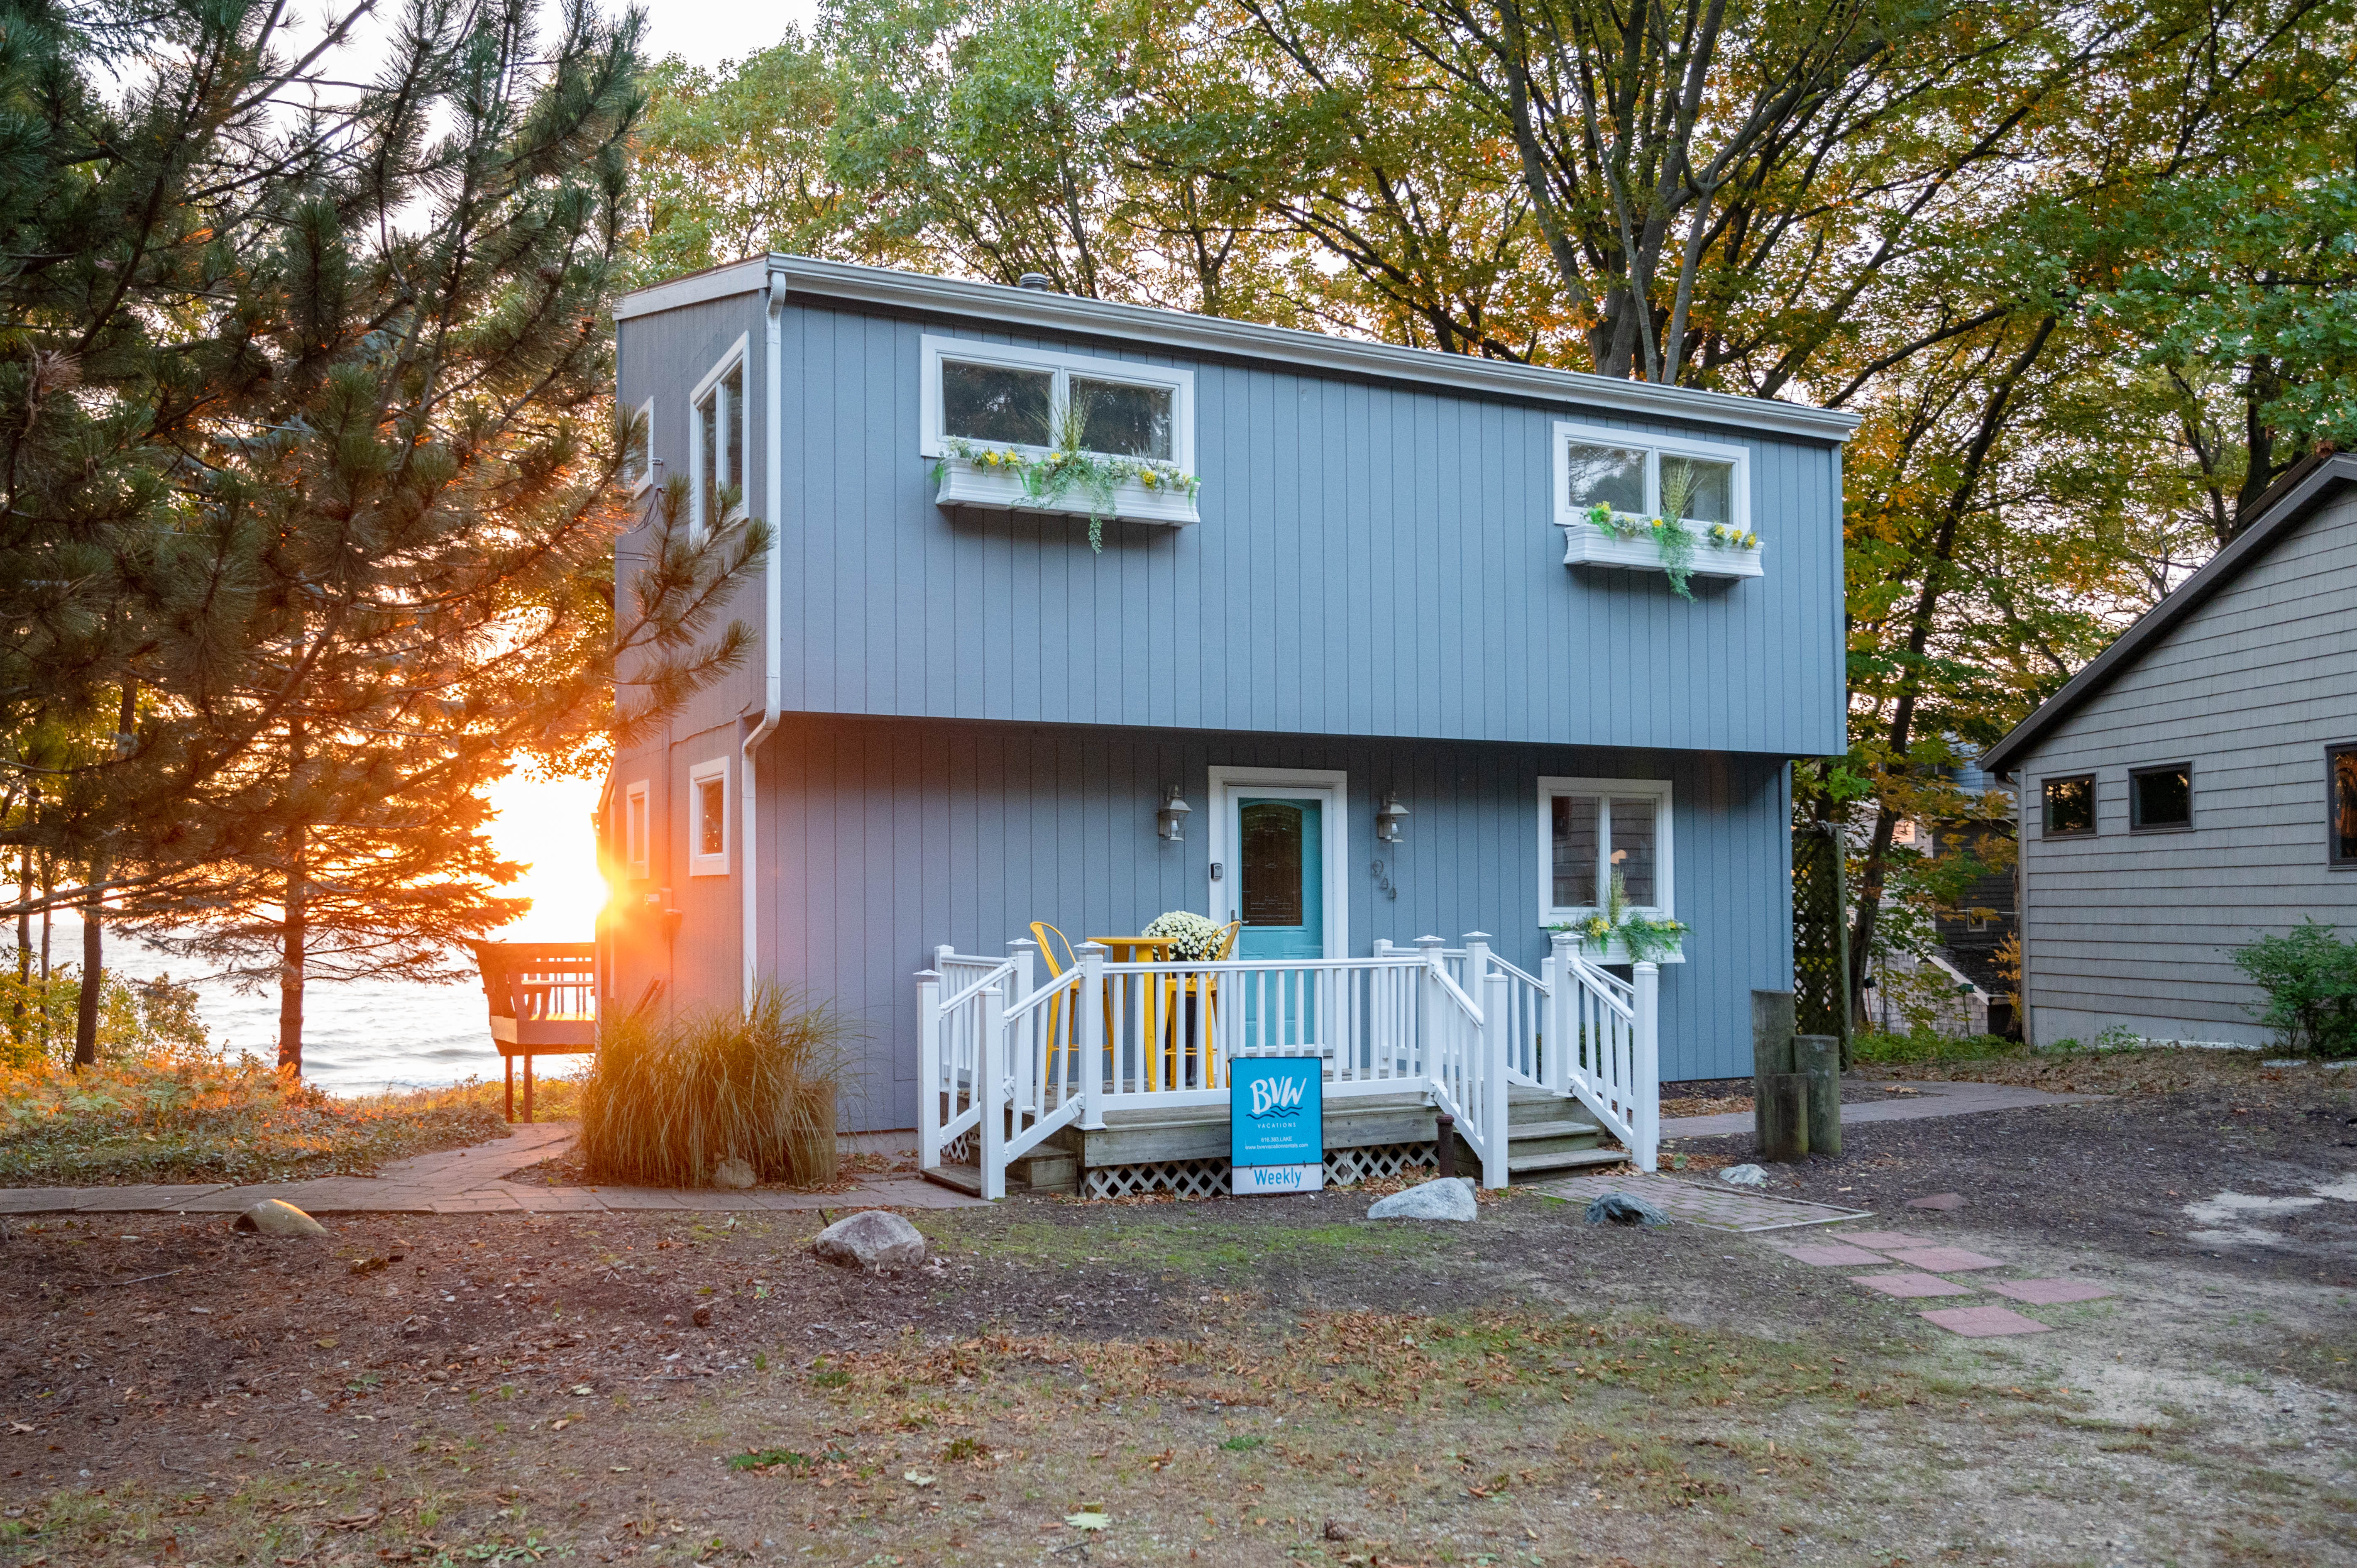 Soaking up the sun is exactly what this lakefront vacation cottage is all about.